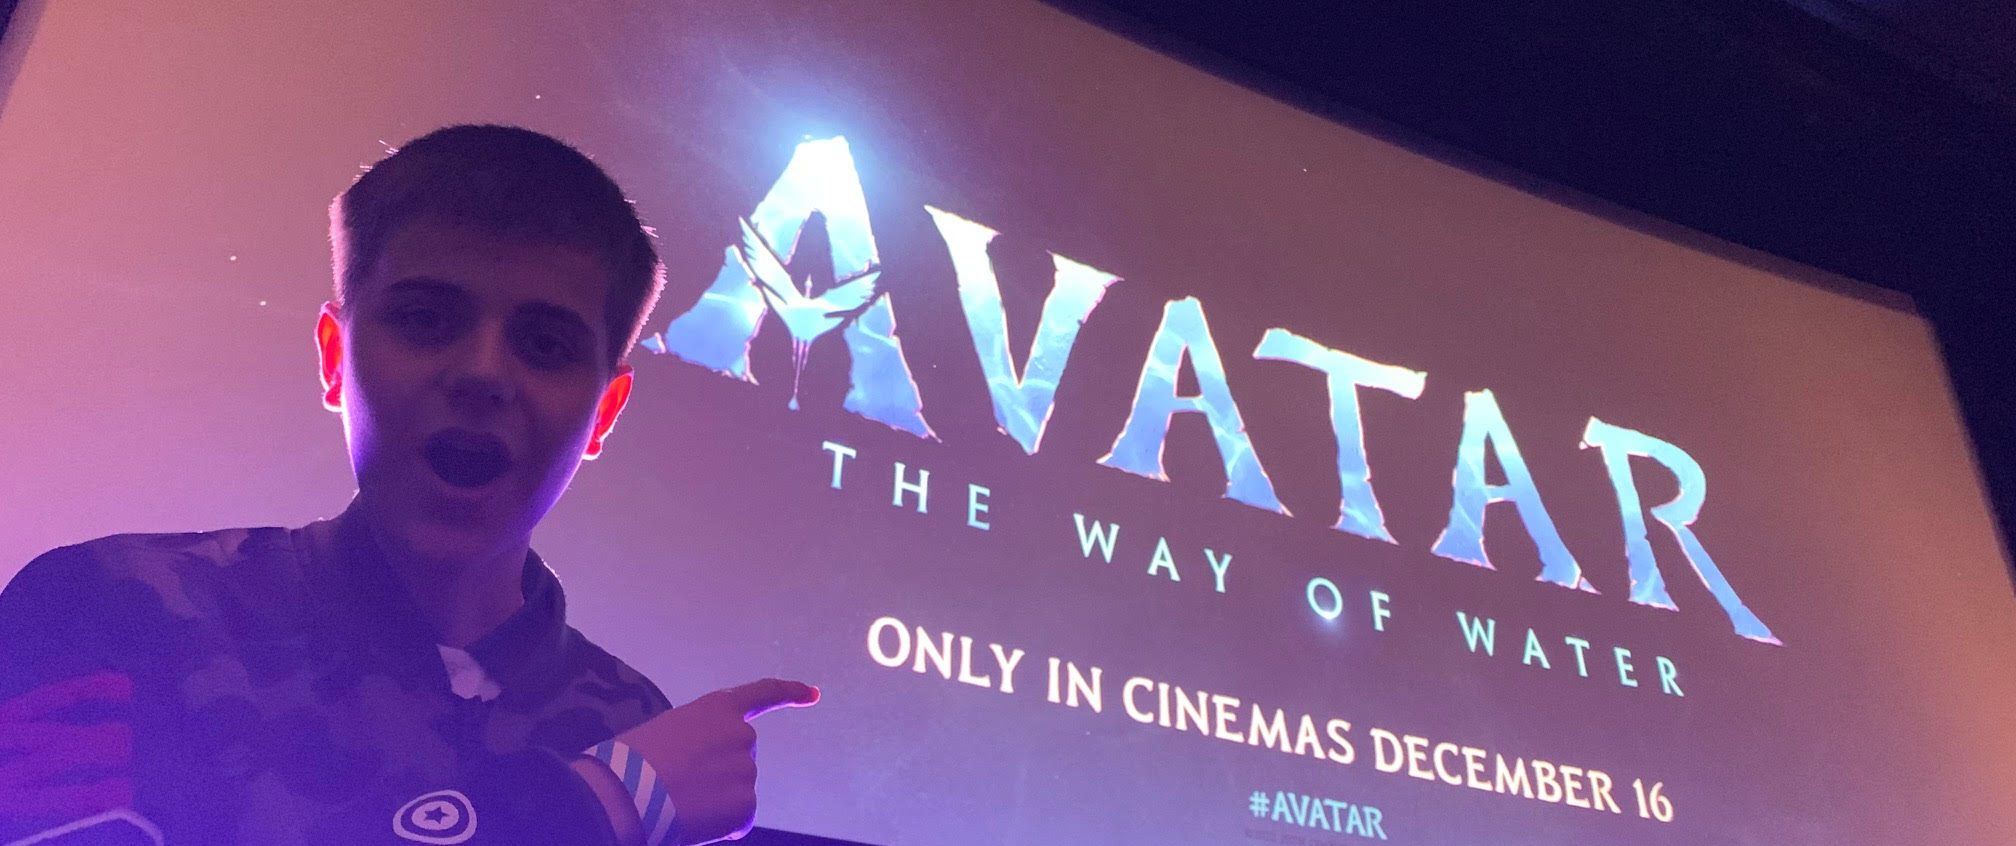 Con at the Avatar The Way of Water Trailer Launch Party